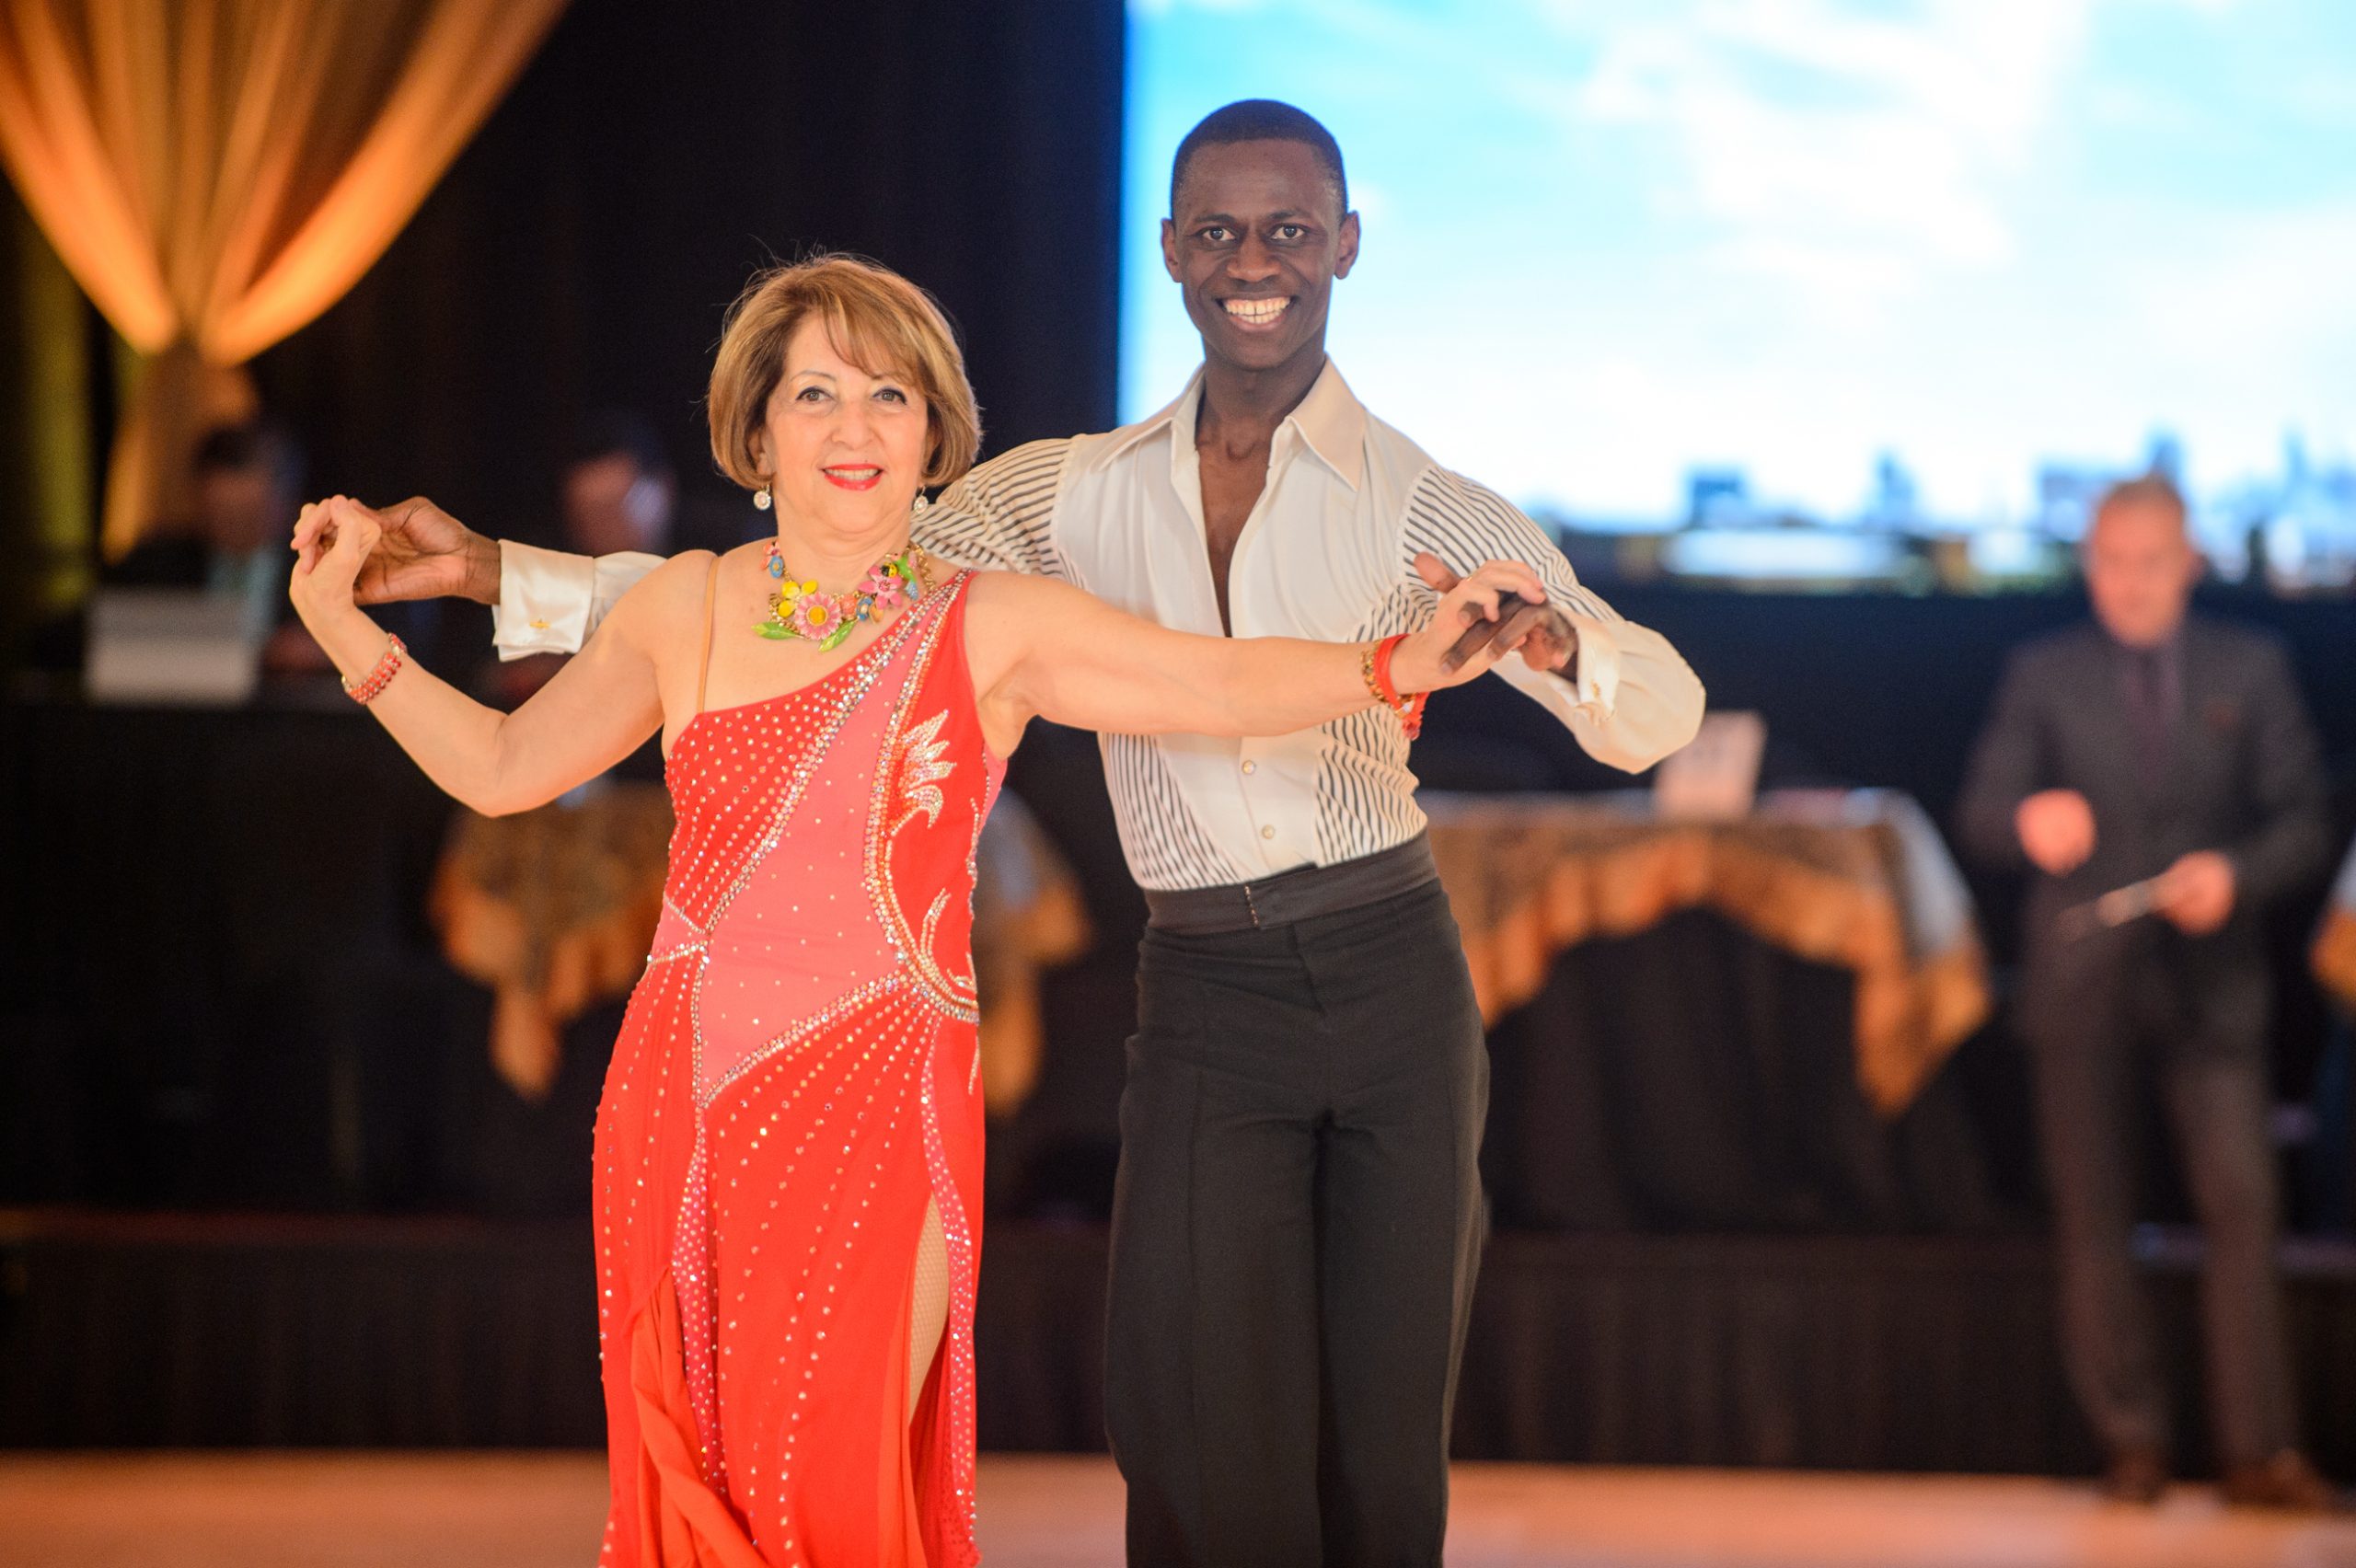 Abraham Sannoh and student competing at the Maryland Dancesport Championships ©TimeLine Media